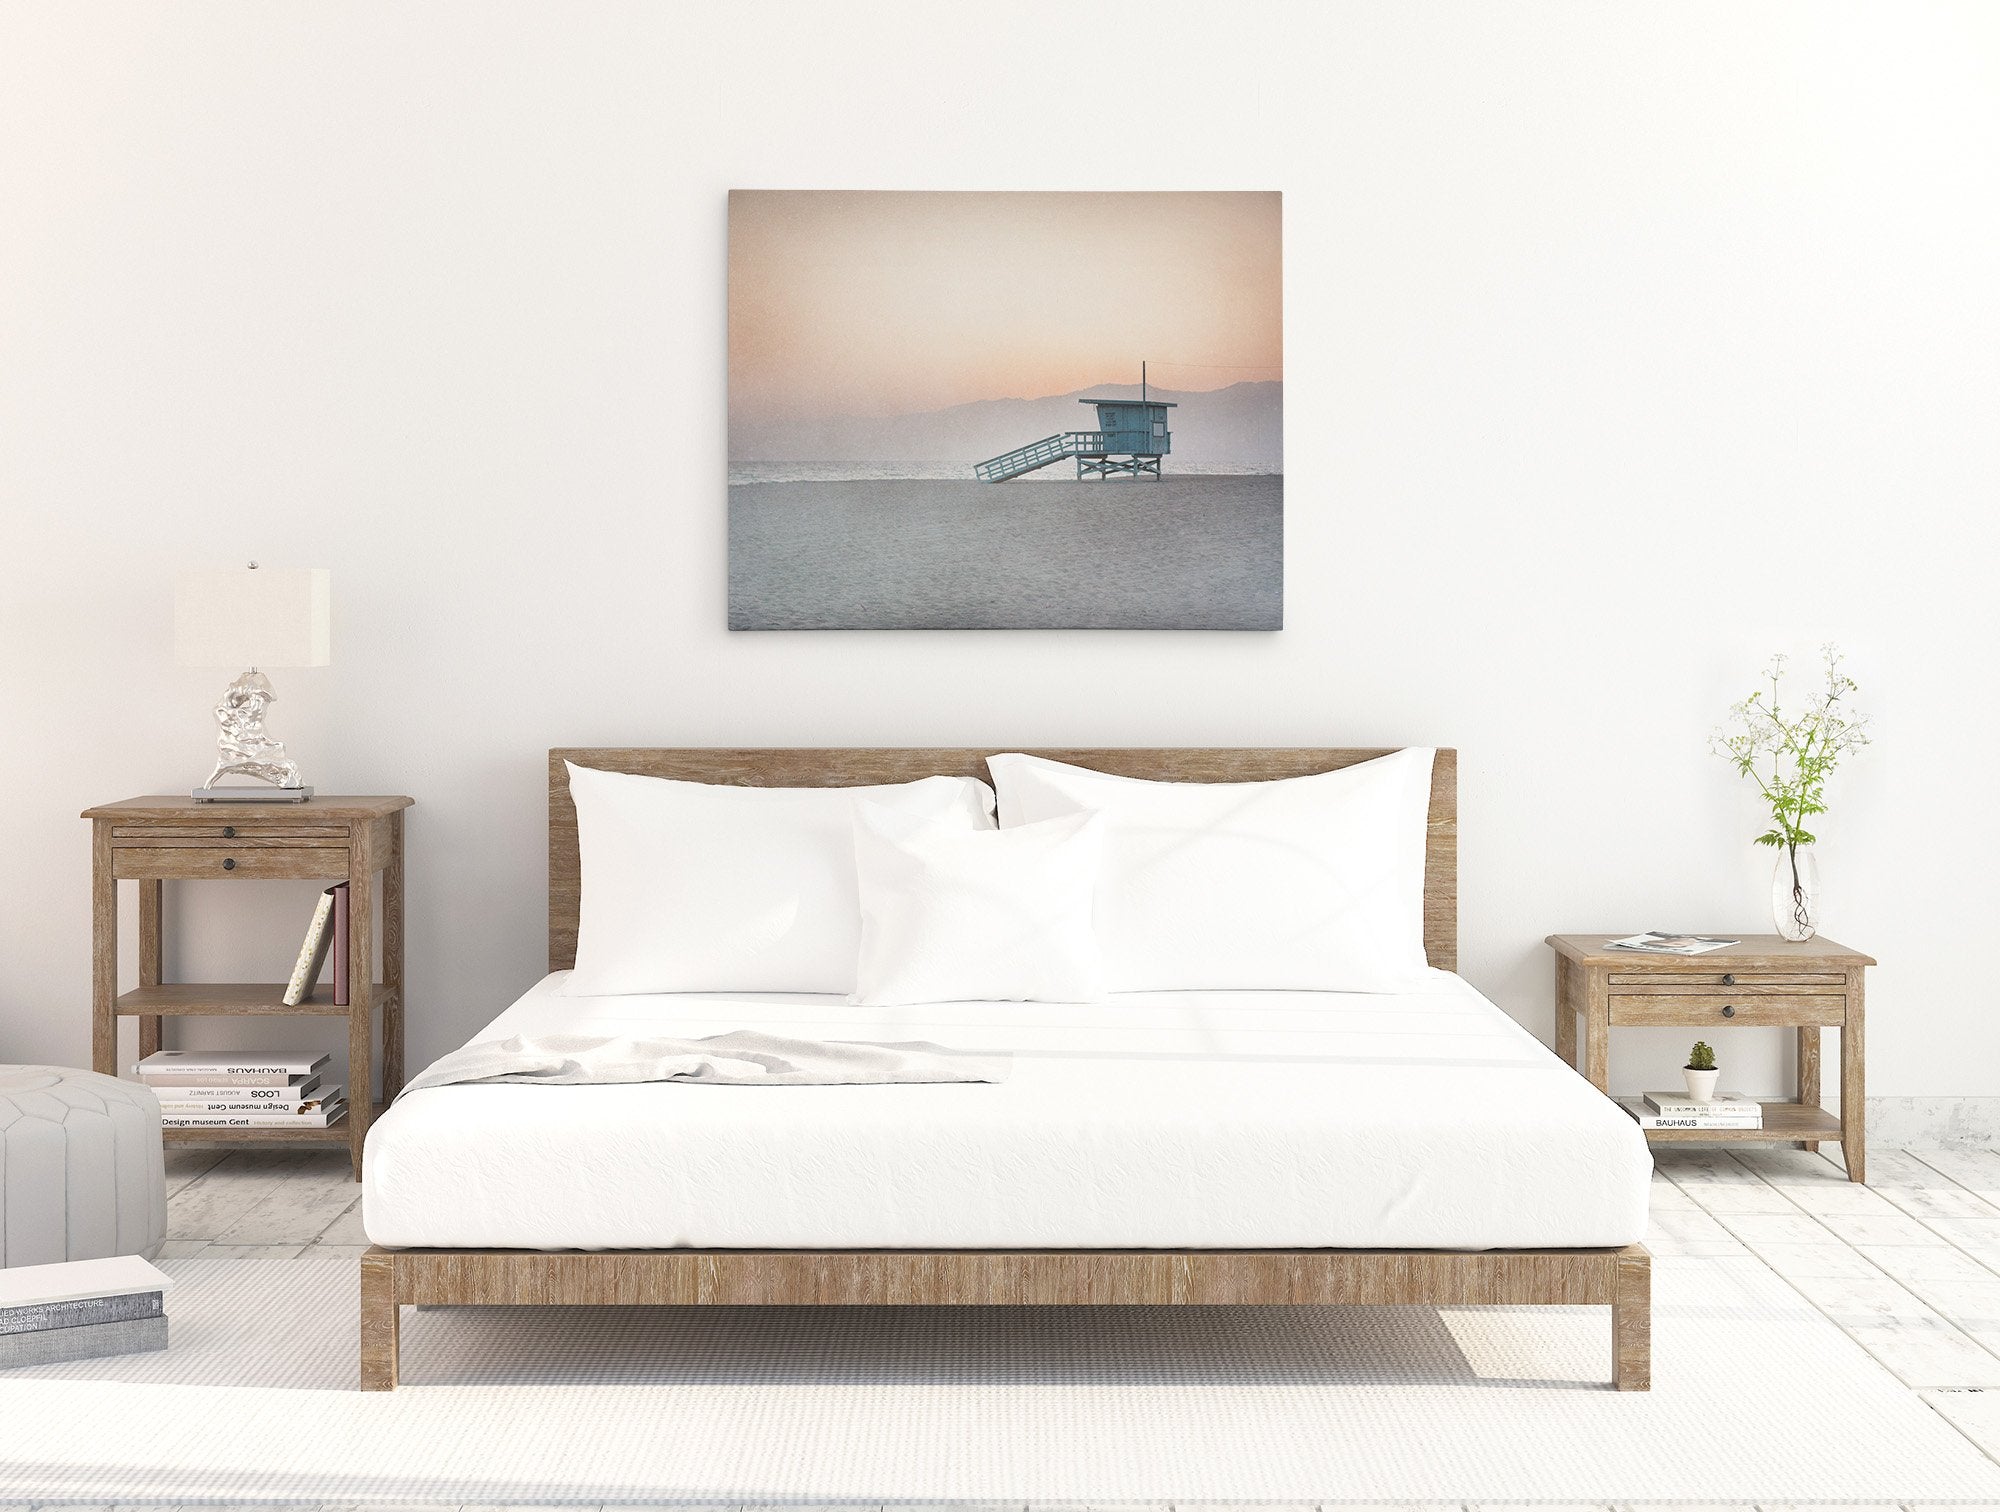 A minimalist bedroom featuring a neatly made bed with white bedding, flanked by wooden nightstands with lamps and a plant. A framed Sunset photograph of Venice Santa Monica beach hangs above the bed from Offley Green&#39;s Pink Coastal Wall Art, &#39;Lifeguard Tower&#39;.